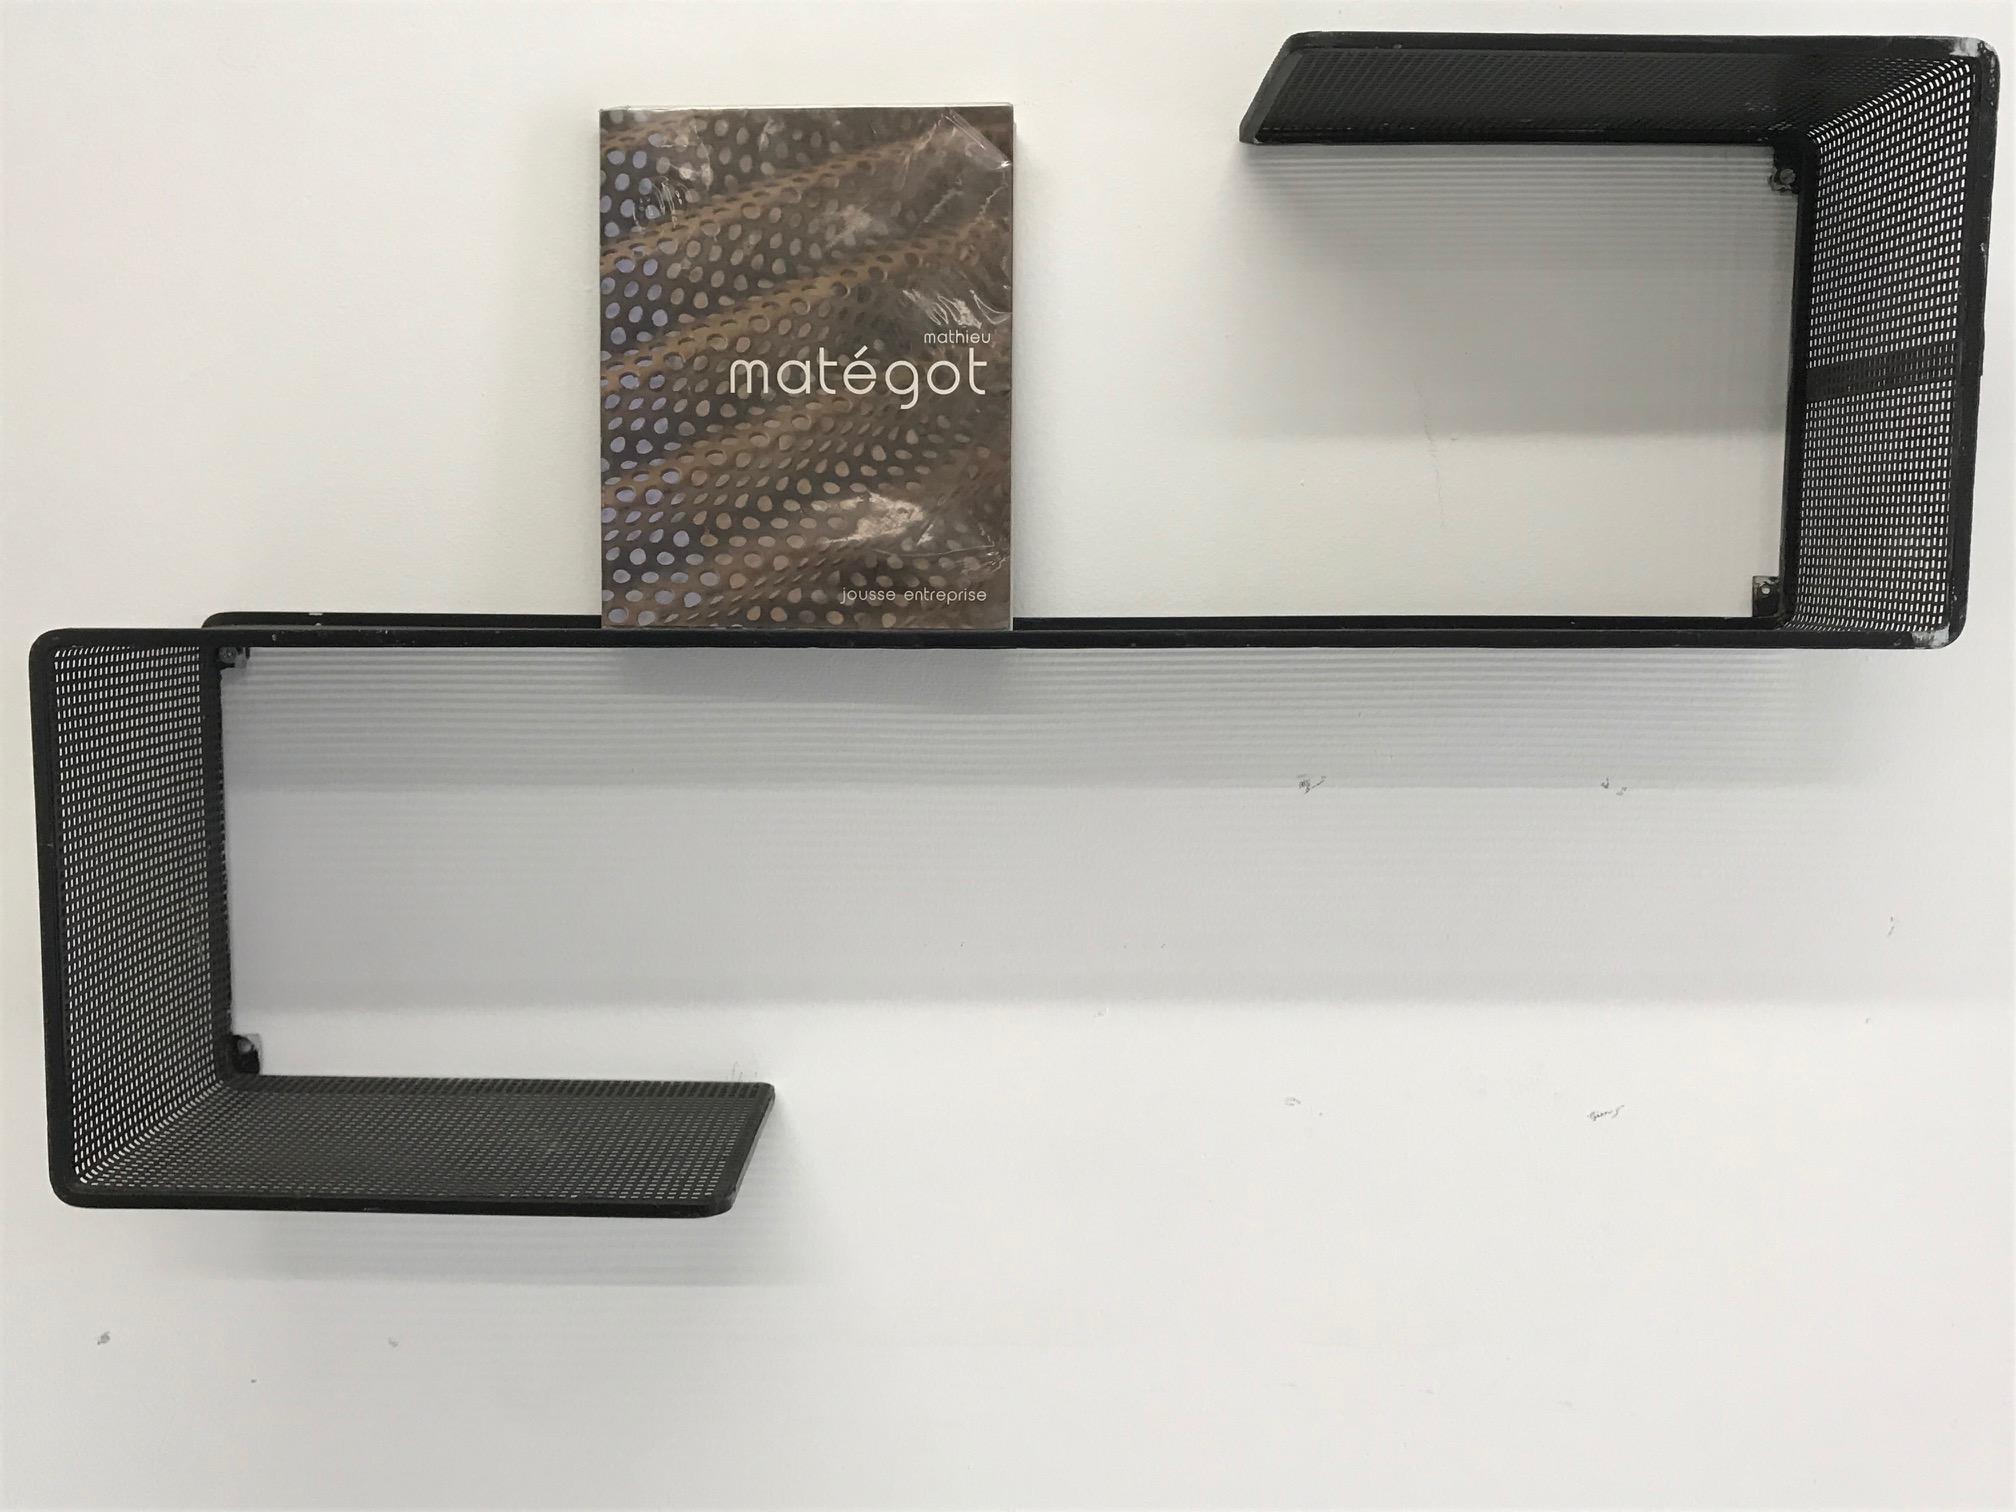 Dedal wall shelf by Mathieu Mategot
Open shelf forming a large S, a central shelf, upper half-shelf and lower half-shelf, black lacquered rigitulle bordered by a metal rod, circa 1955. 

Original painting

Bibliography: Patrick Favardin, Le